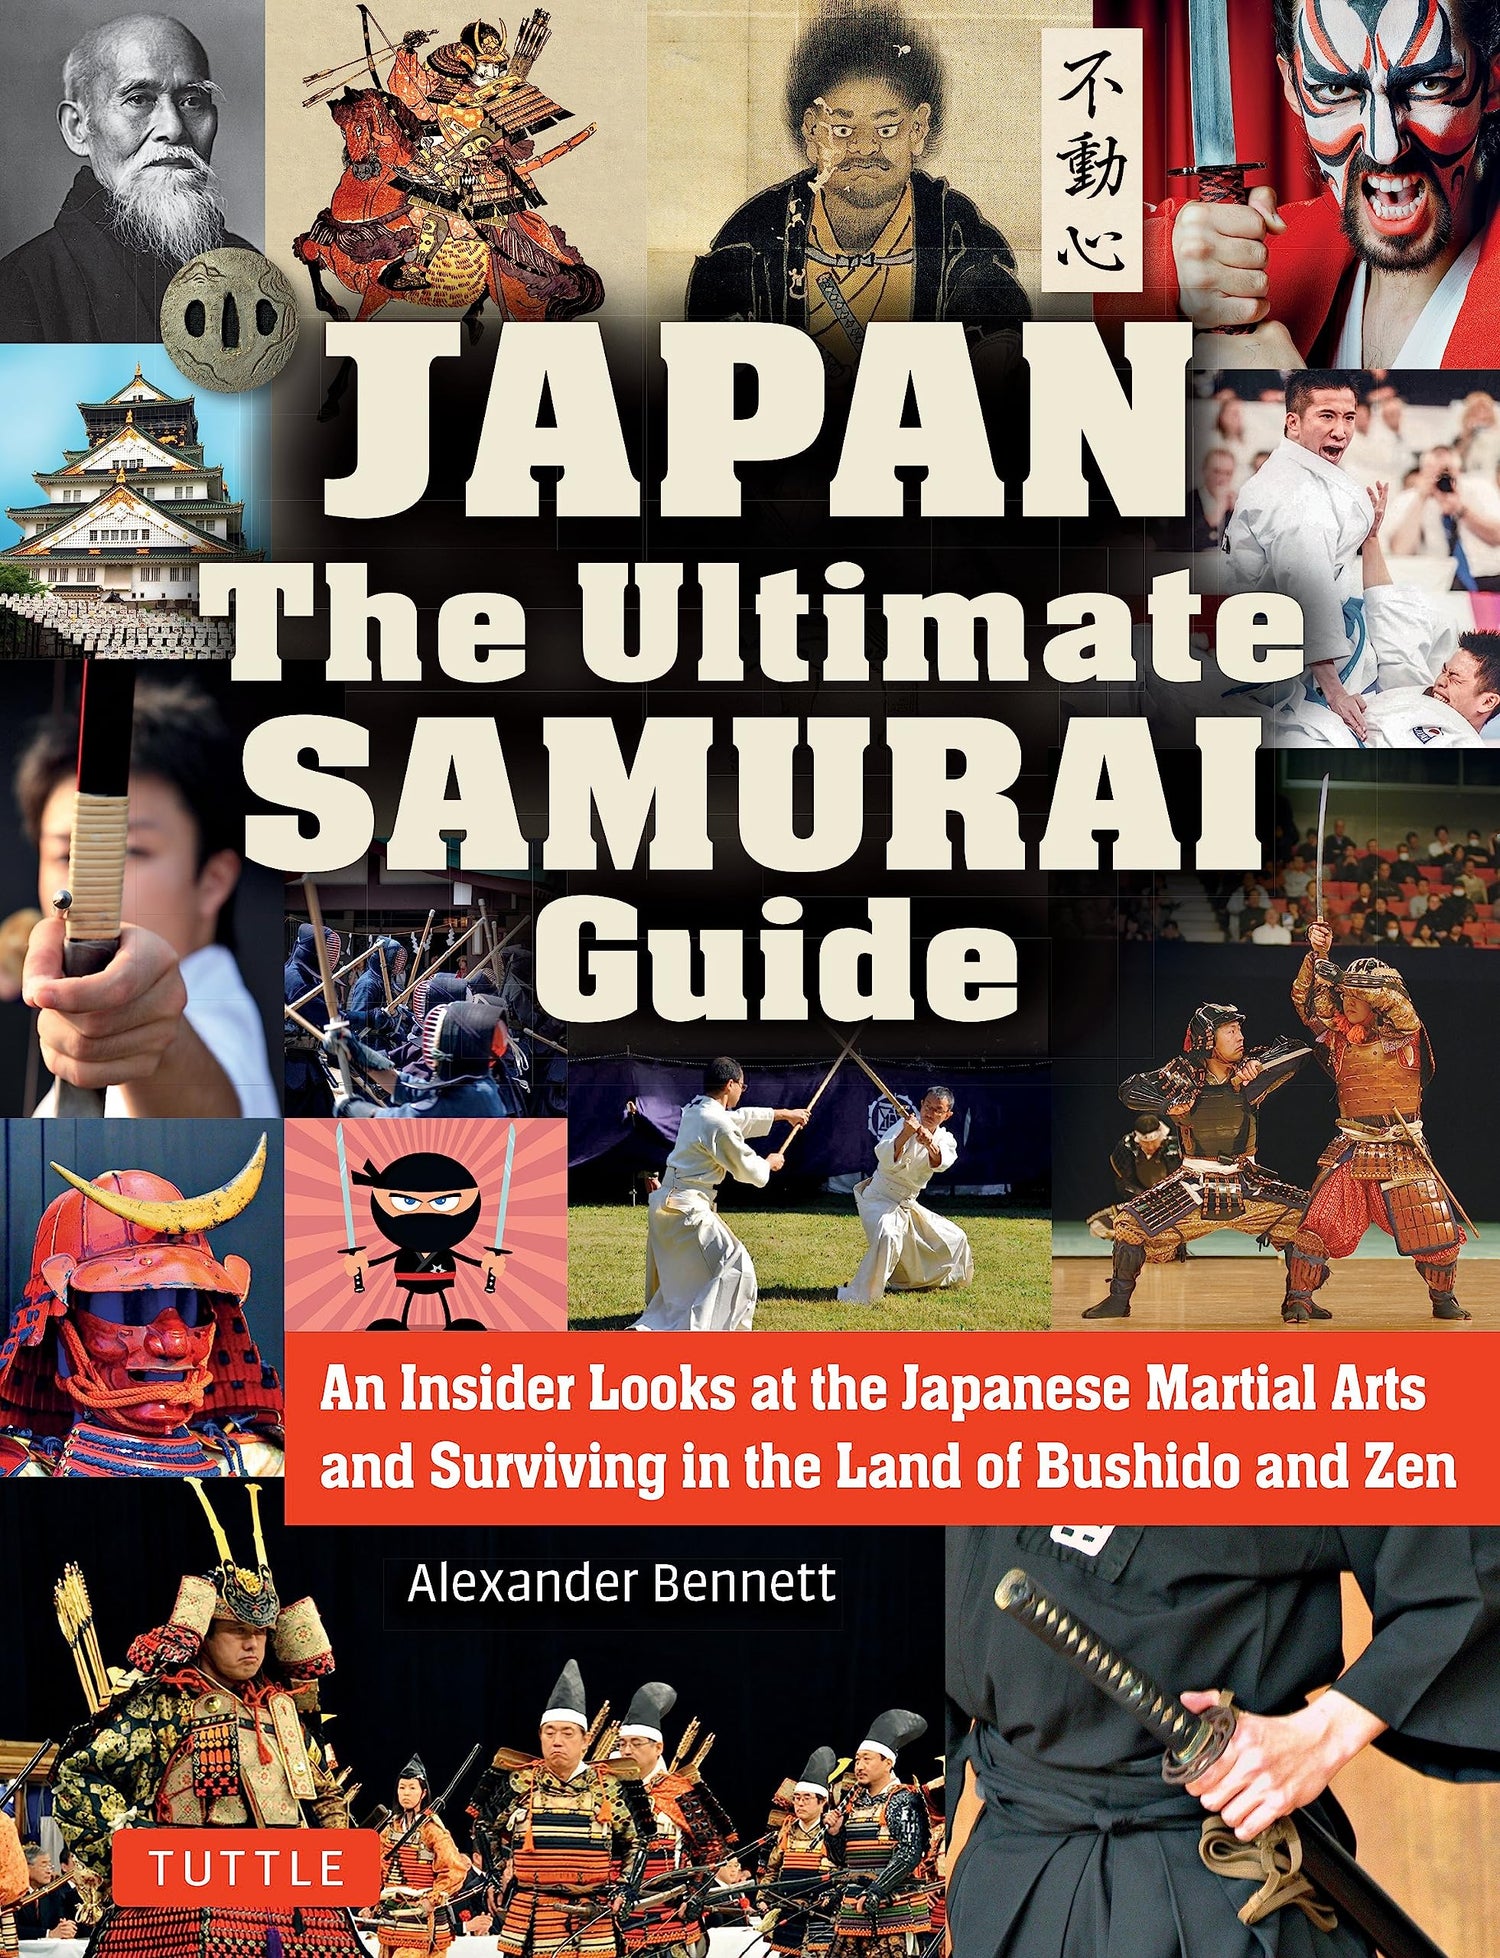 Japan The Ultimate Samurai Guide: An Insider Looks at the Japanese Martial Arts and Surviving in the Land of Bushido & Zen Book by Alex Bennett